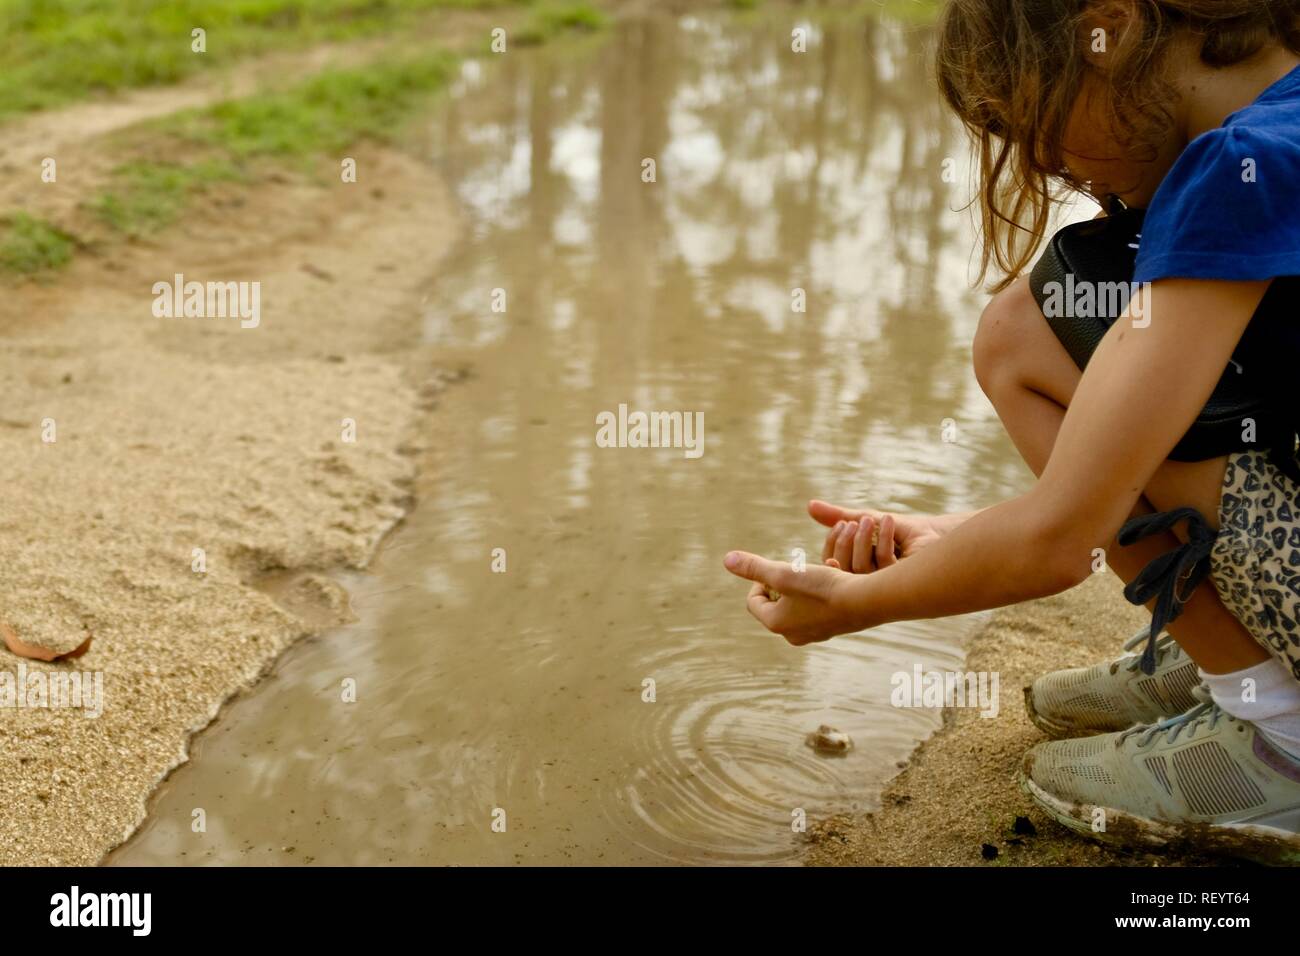 A young girl playing in a muddy puddle on a four wheel drive track through a forest, Mia Mia State Forest, Queensland, Australia Stock Photo